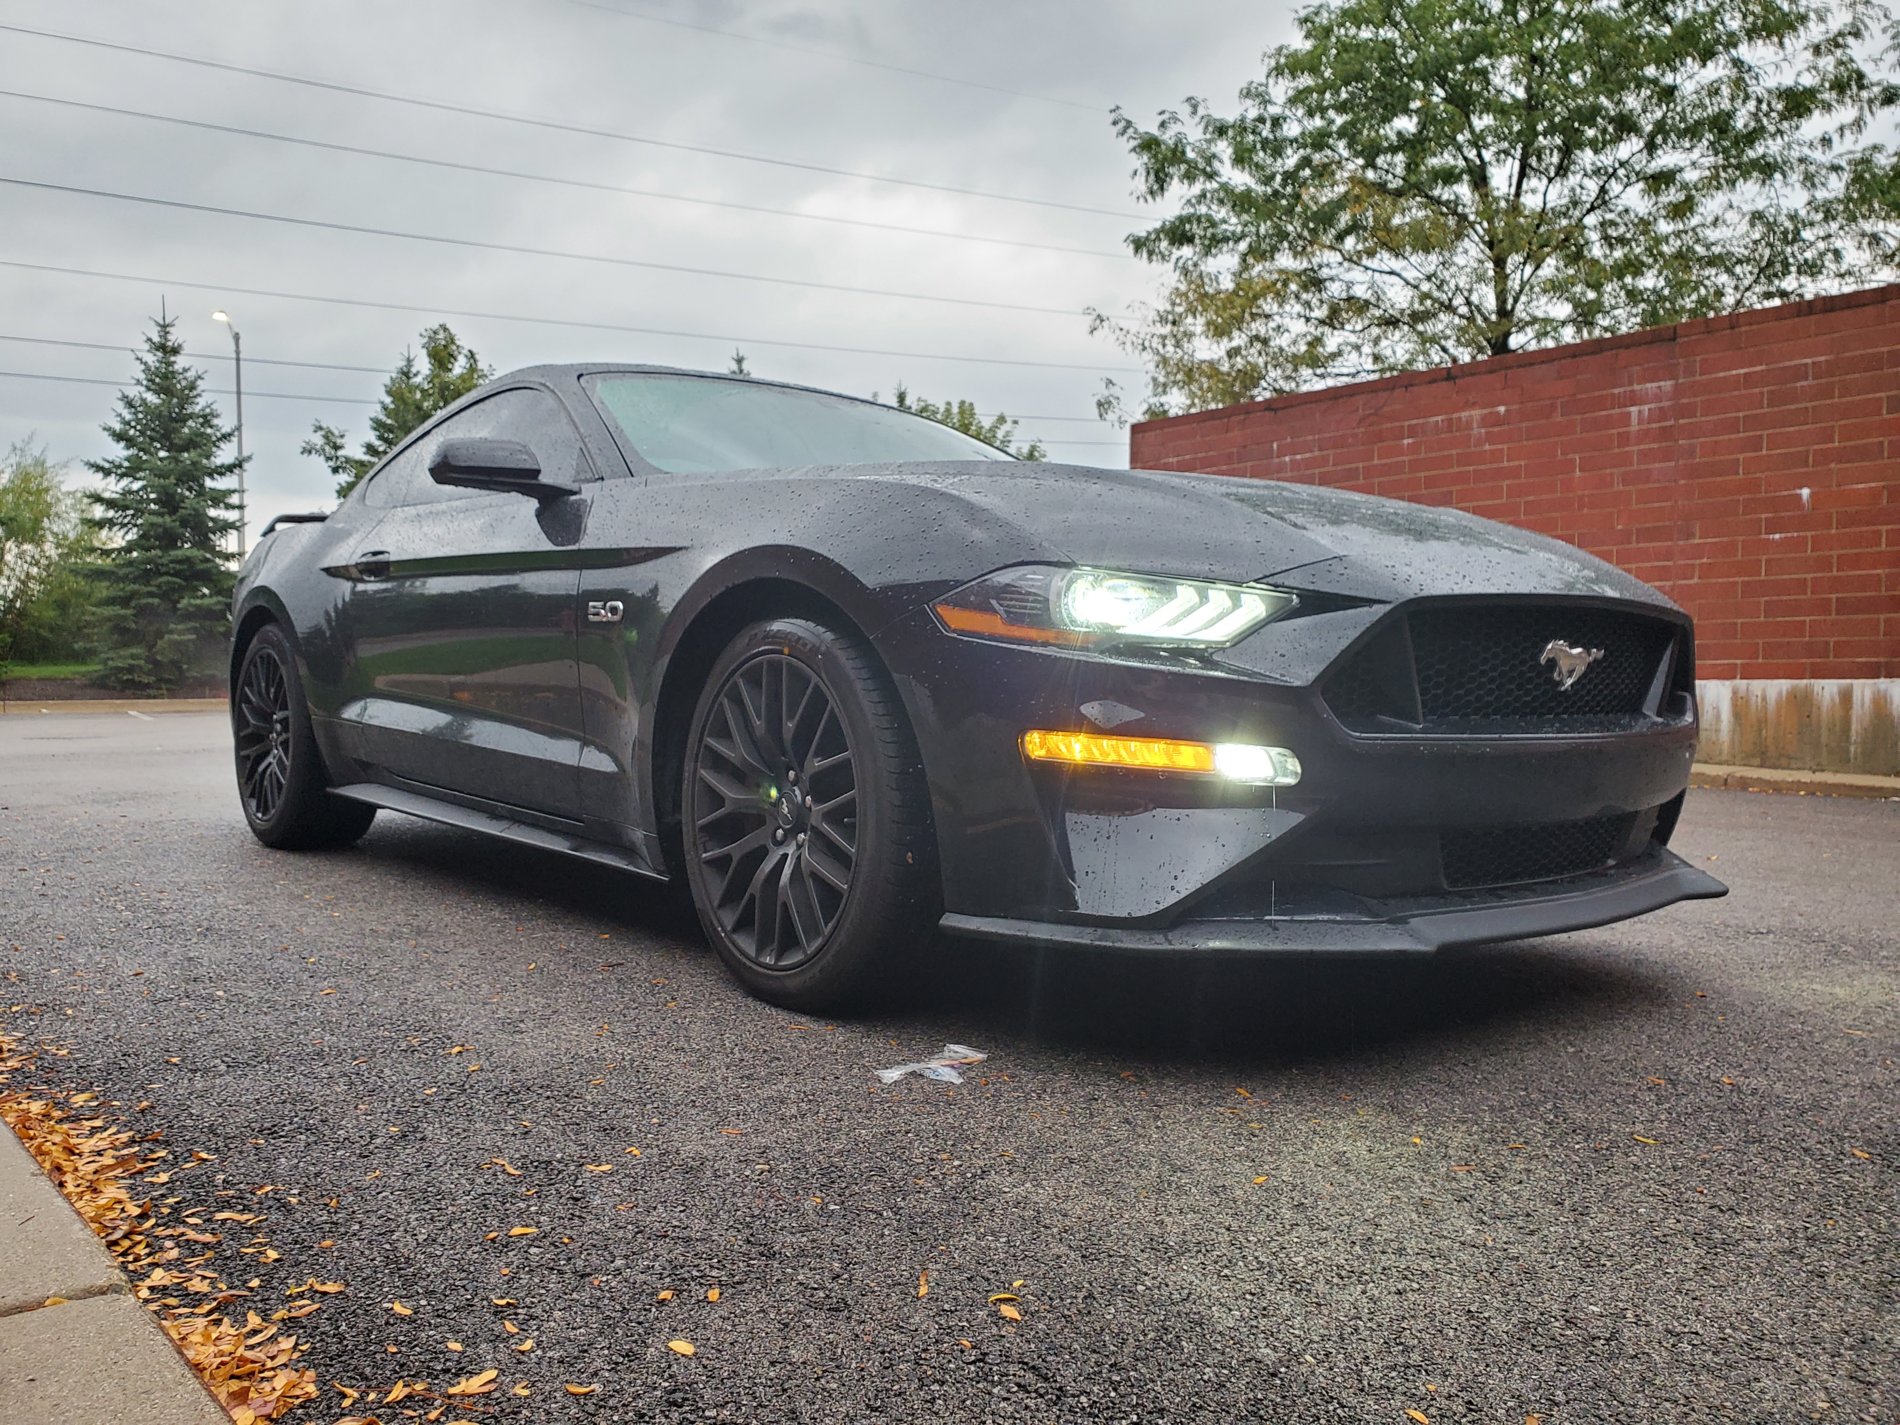 S650 Mustang test 20190927_180921